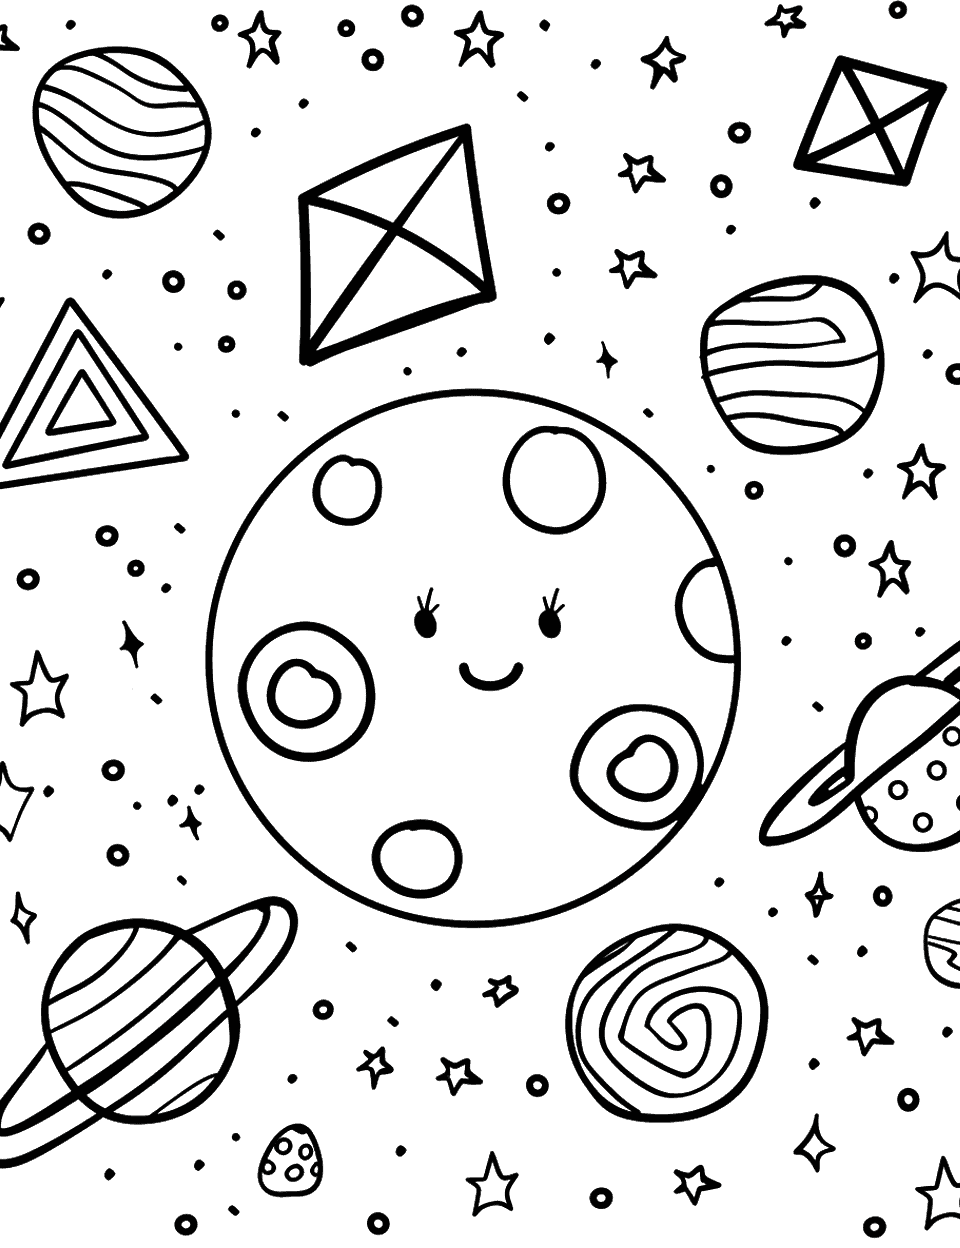 Basic Shapes in Space Coloring Page - Planets shaped like squares, circles, and triangles floating in a starry sky.